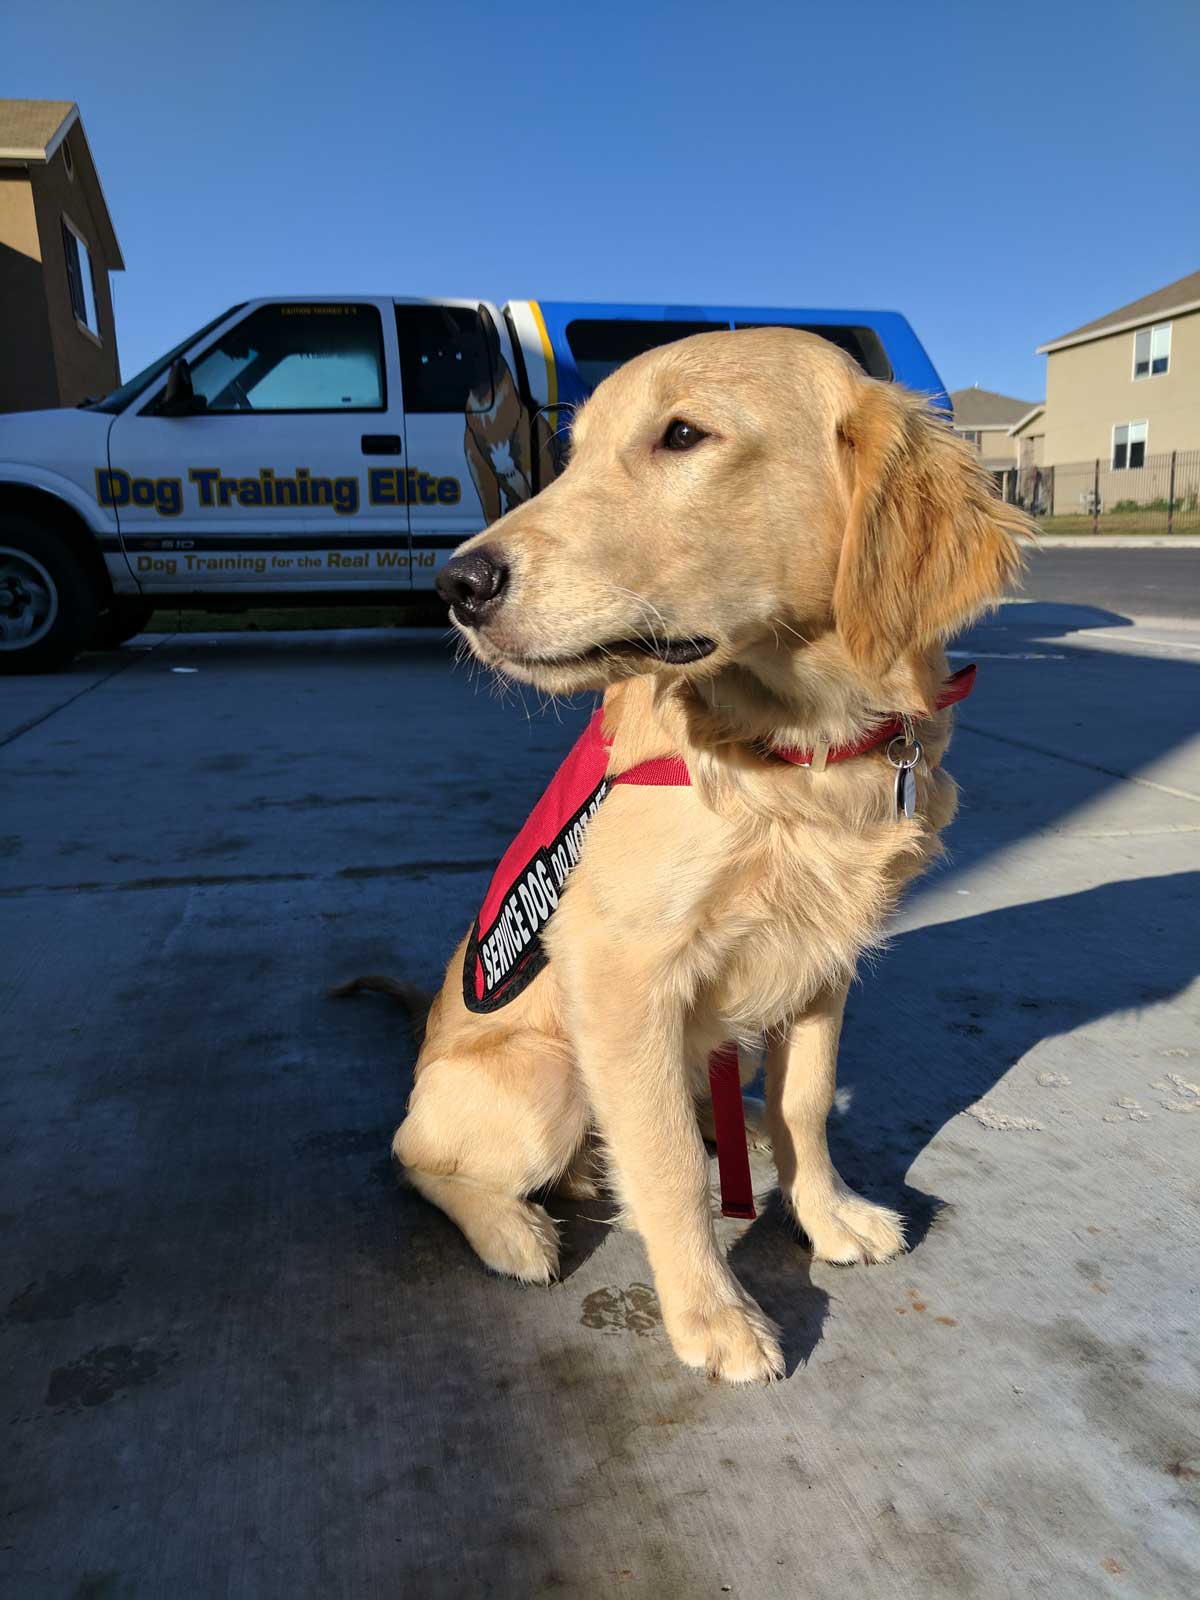 Dog Training Elite Northern Utah is proud to have the highest rated service dog training programs near you in Davis / Weber County.